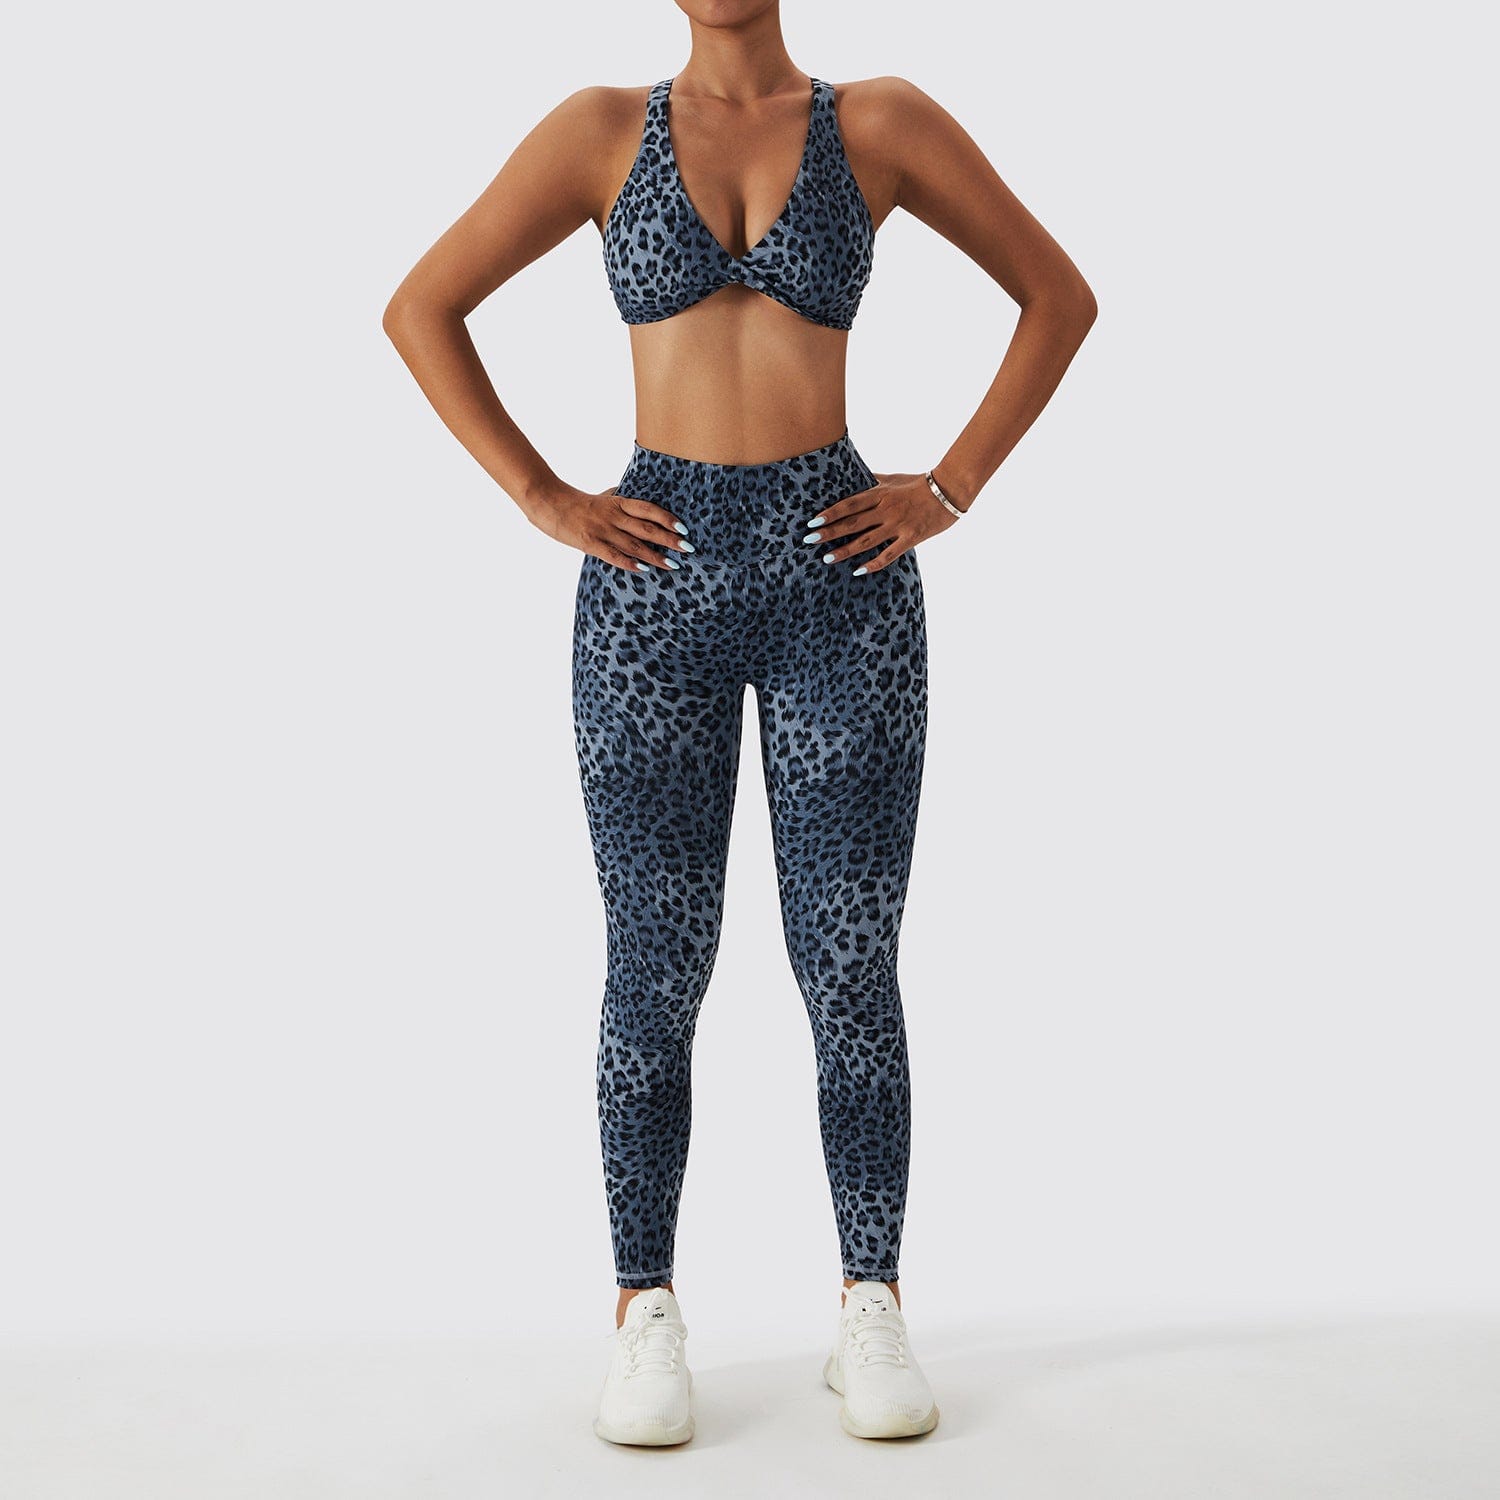 Women's Active Seamless Cheetah Print Sports Bra. (3 Pack) LARGE ONLY •  Scoop neckline • Two removable pads provide support & shaping • Reinforced  band • Racerback design • Cheetah print •